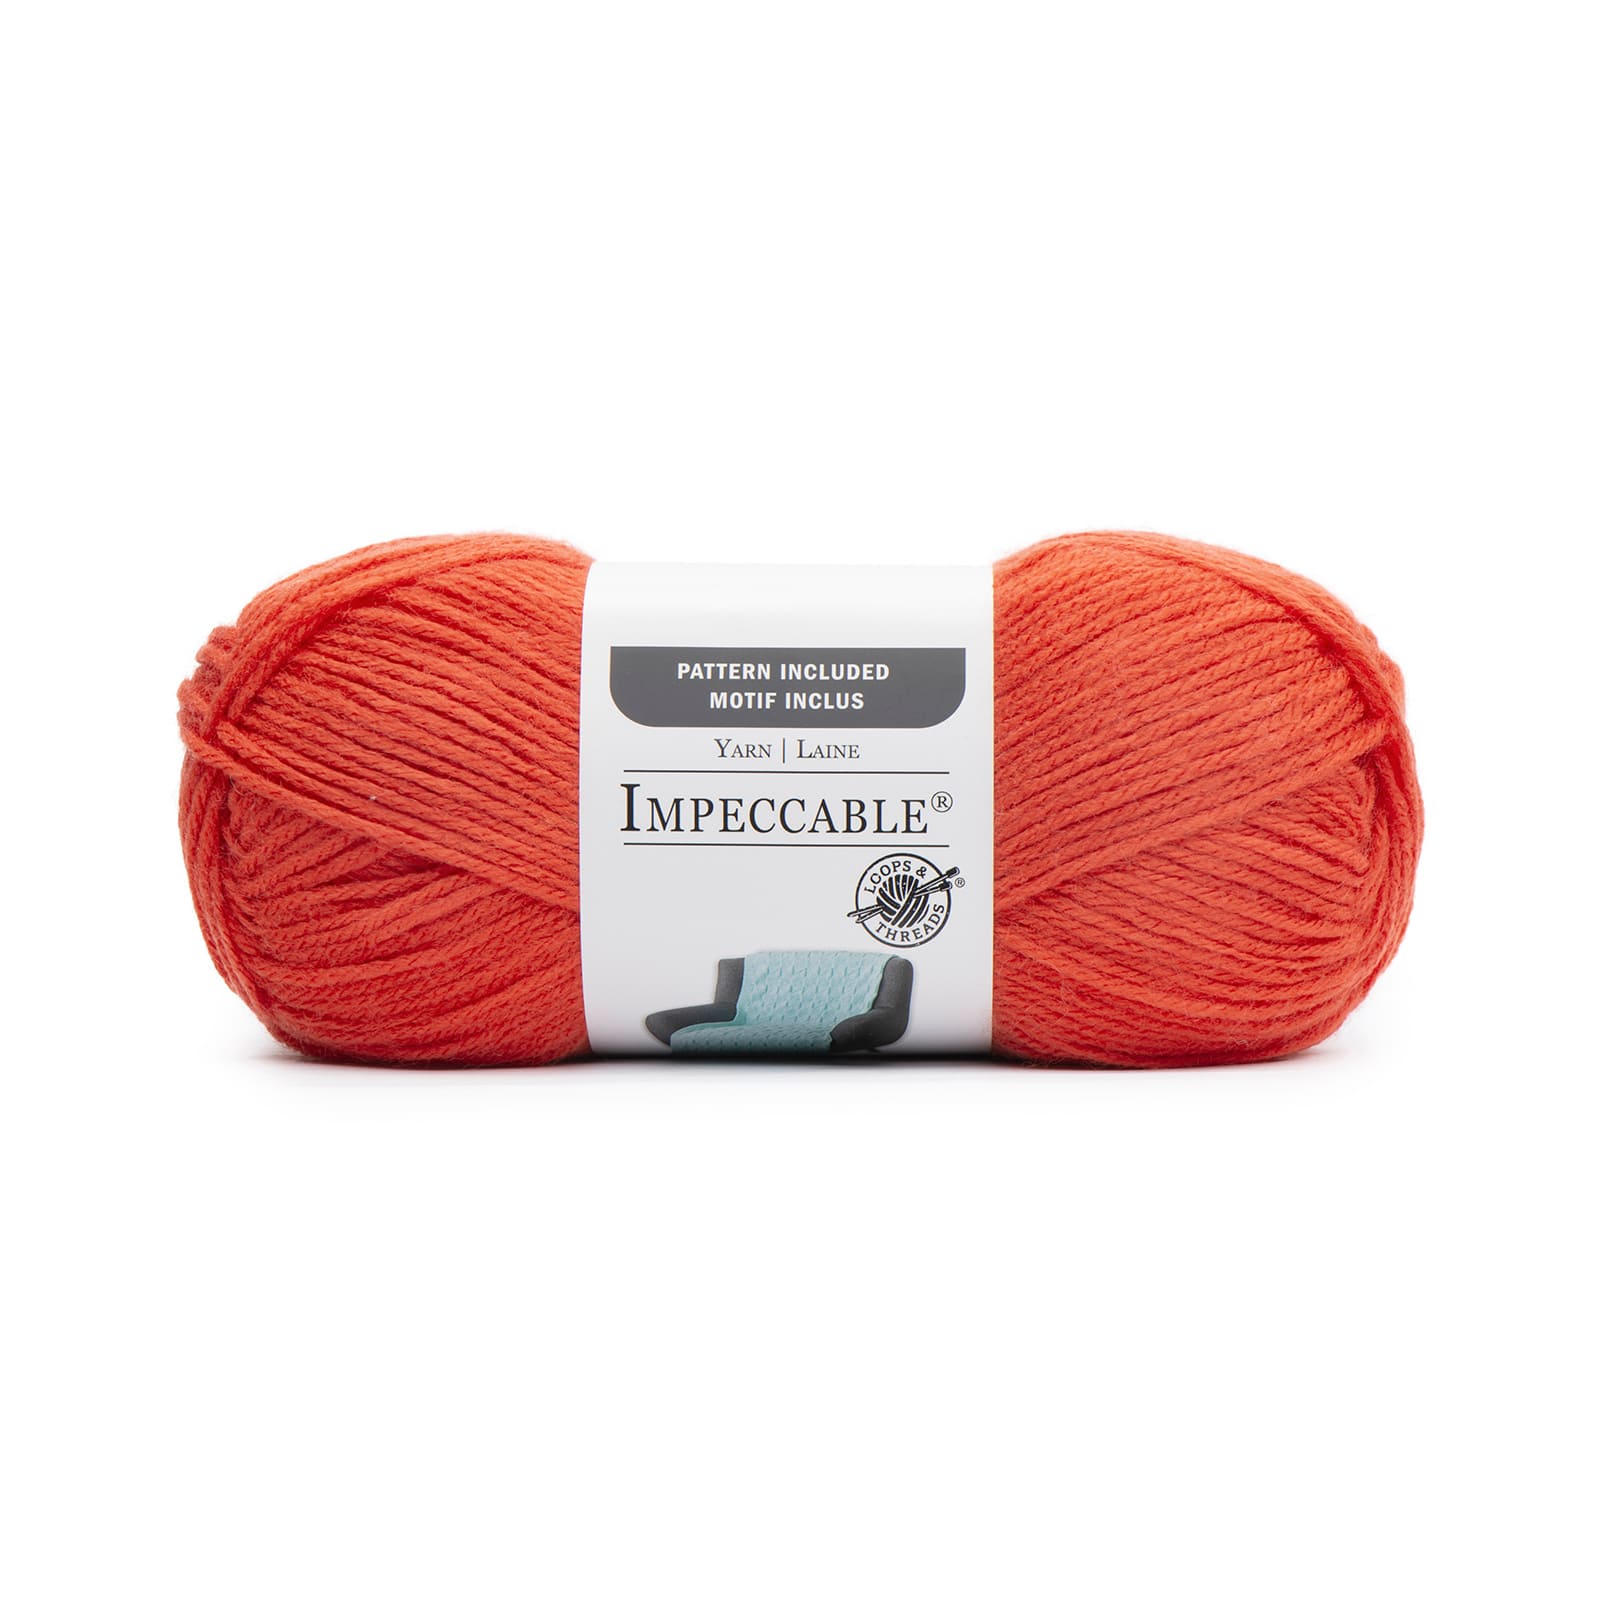 Yarn for Knitting, Crochet, and Crafting